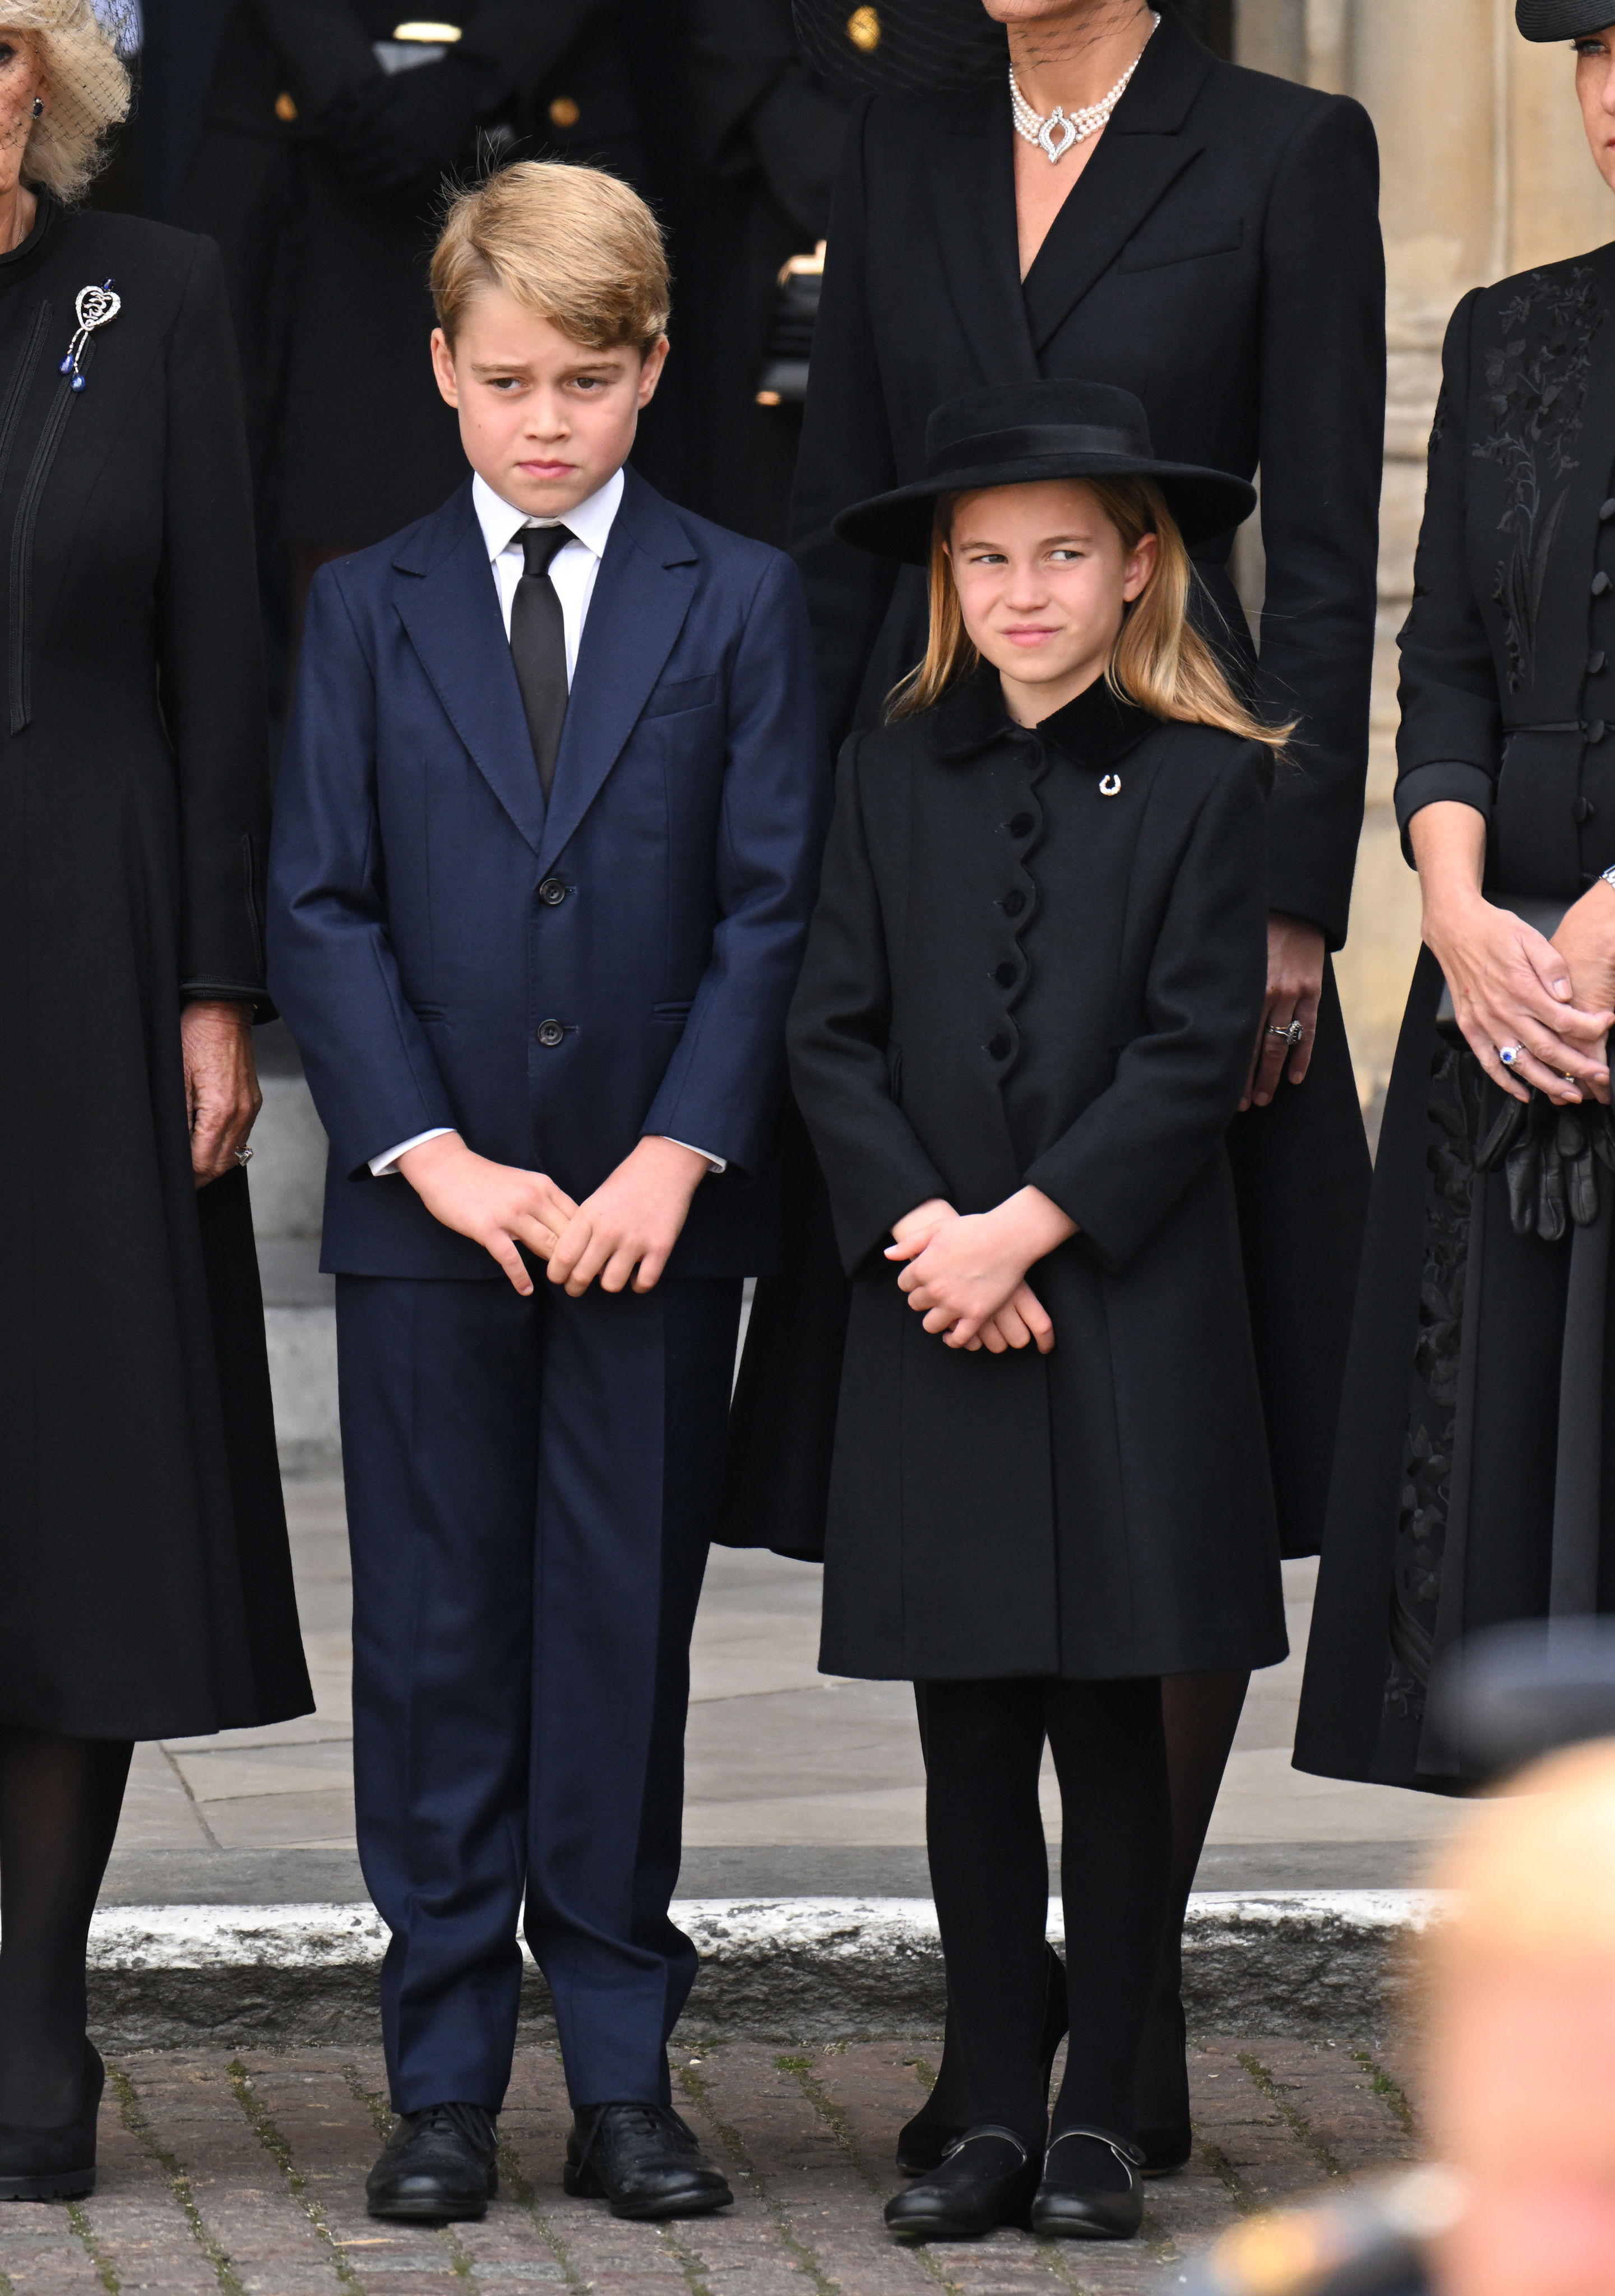 <p>Prince George and Princess Charlotte stood outside Westminster Abbey in London during <a href="https://www.wonderwall.com/celebrity/royals/best-photos-from-queen-elizabeth-ii-funeral-king-charles-princes-william-prince-harry-george-charlotte-kate-meghan652347.gallery">the state funeral</a> of great-grandmother Queen Elizabeth II on Sept. 19, 2022. Charlotte notably wore a diamond horseshoe brooch — a gift from the queen when she was still alive — on her black coat dress to honor the monarch's lifelong love of horses. She also wore a hat to a royal event for the first time.</p>